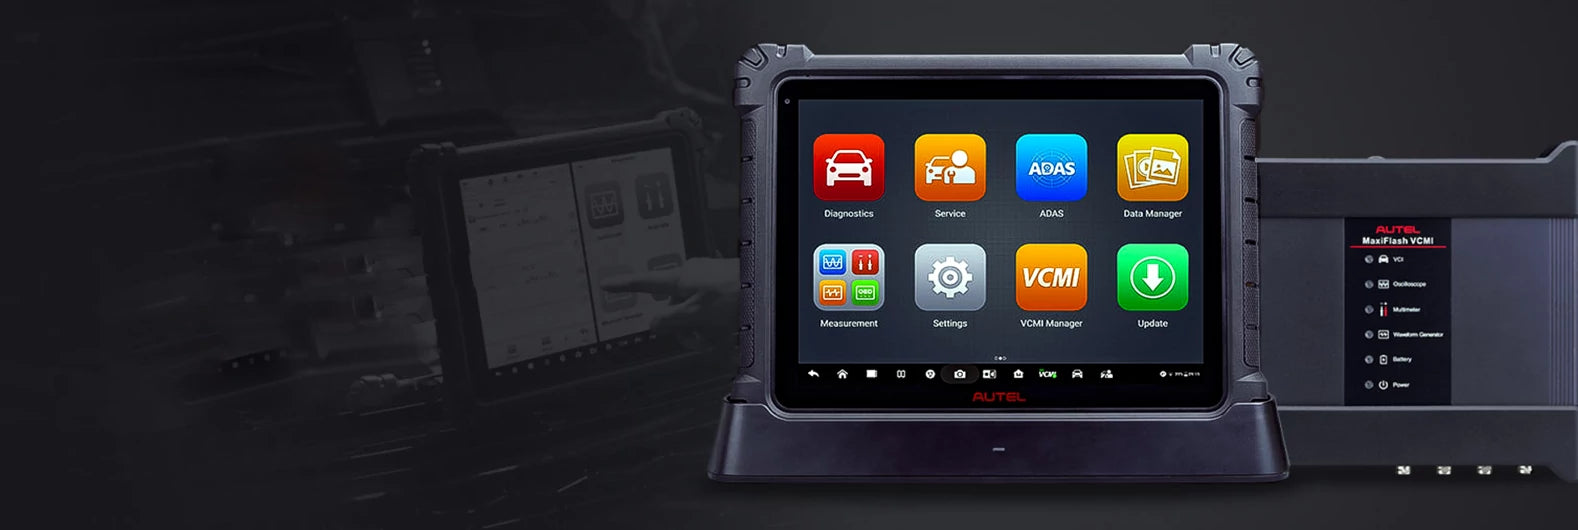 The Autel Maxisys Elite interface, a sleek and intuitive dashboard, displays a vibrant touchscreen with a variety of diagnostic functions and tools. The interface showcases clear icons, menu options, and live data readings, providing users with comprehensive control and analysis of vehicle systems. 